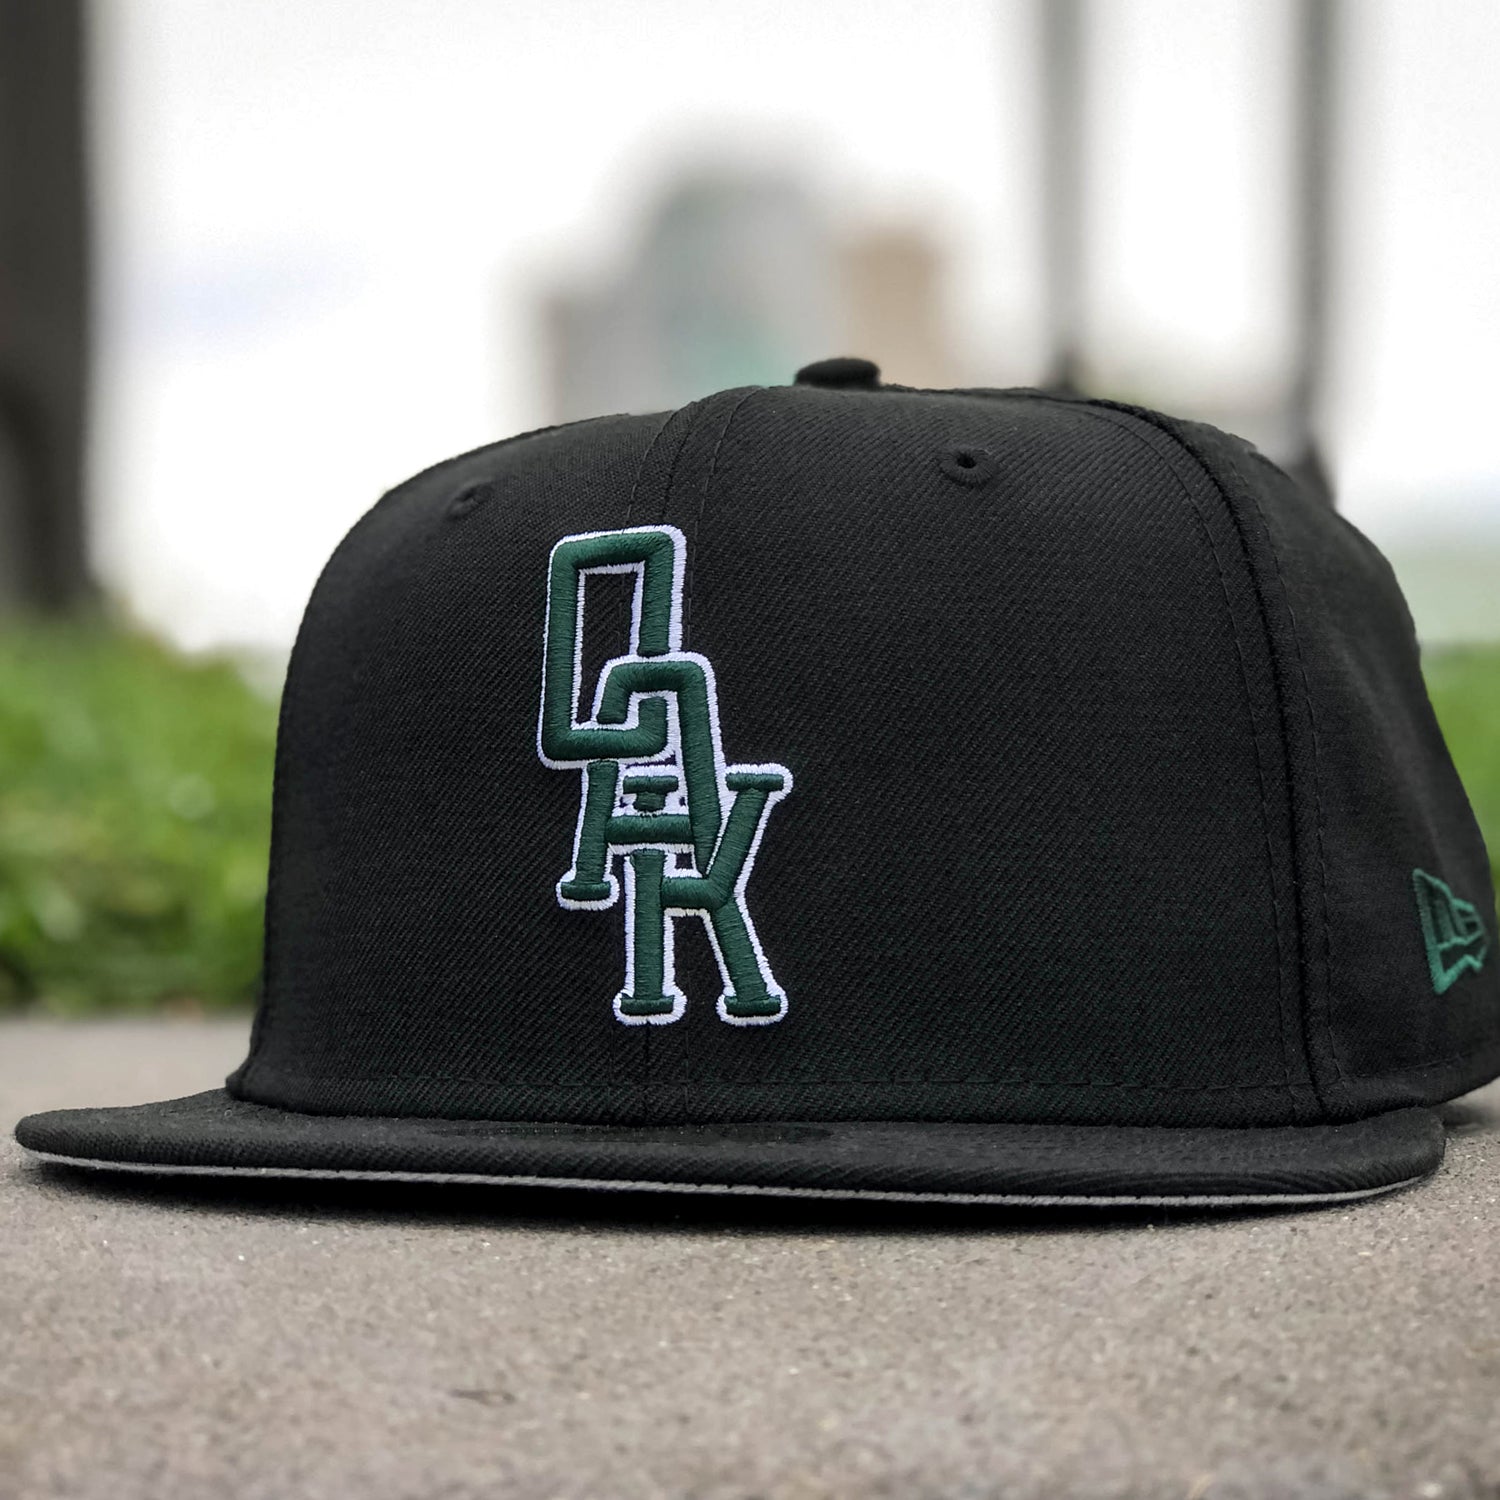 Black New Era cap with a green and white embroidered OAK wordmark on the crown sitting on a sidewalk. 